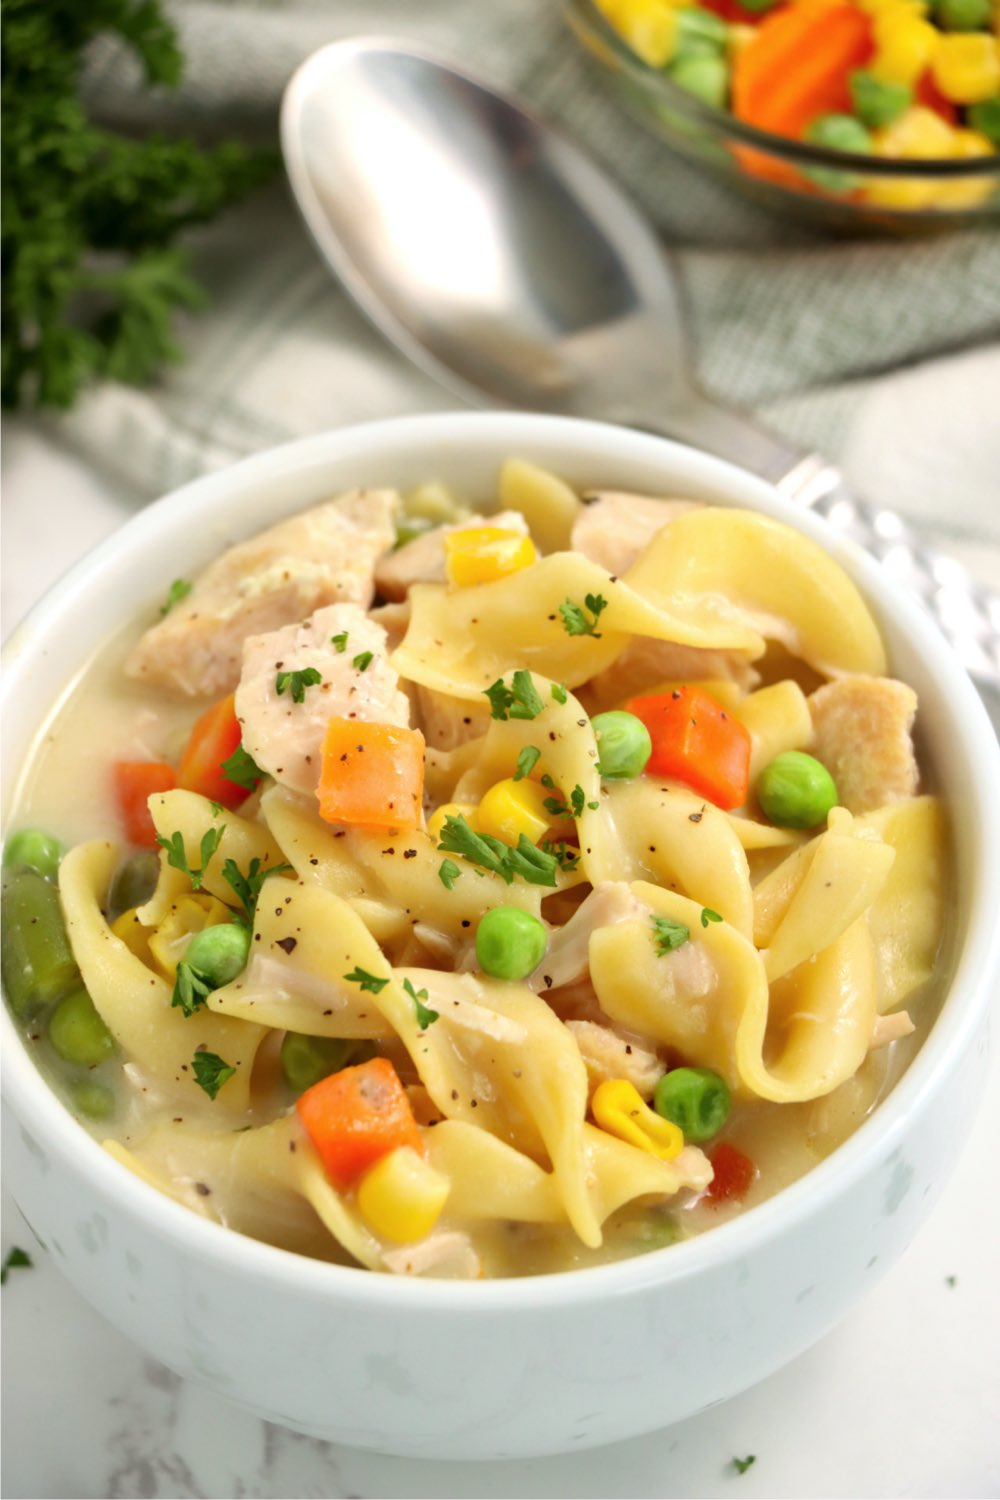 bowl of chicken noodle soup with veggies